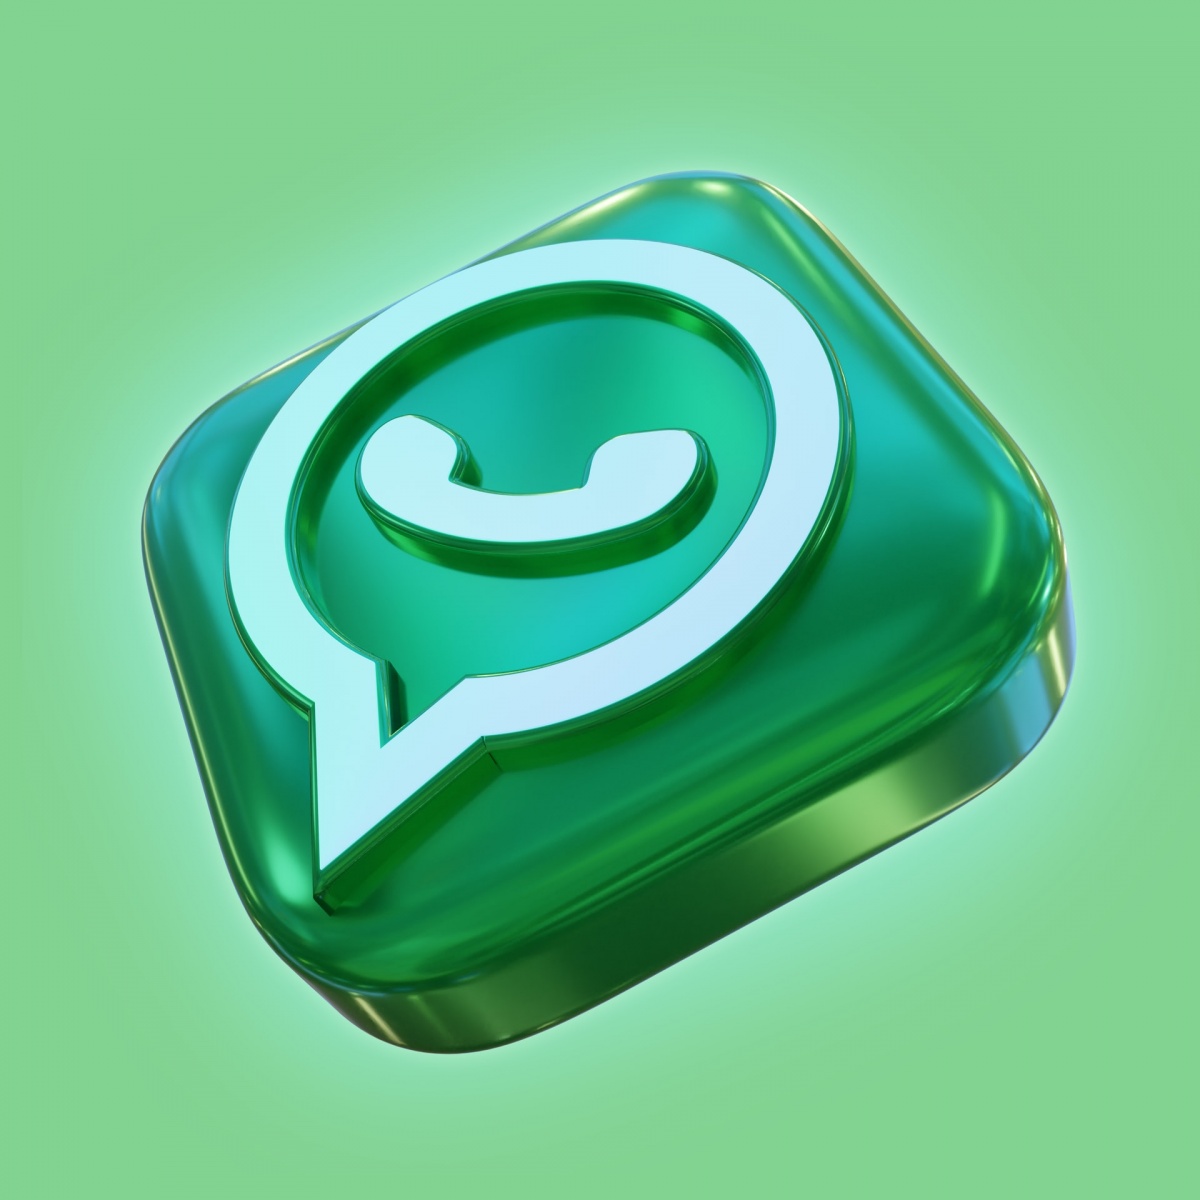 WhatsApp Features Gets an Update: Message Reactions, Better 2-Step Verification, and More